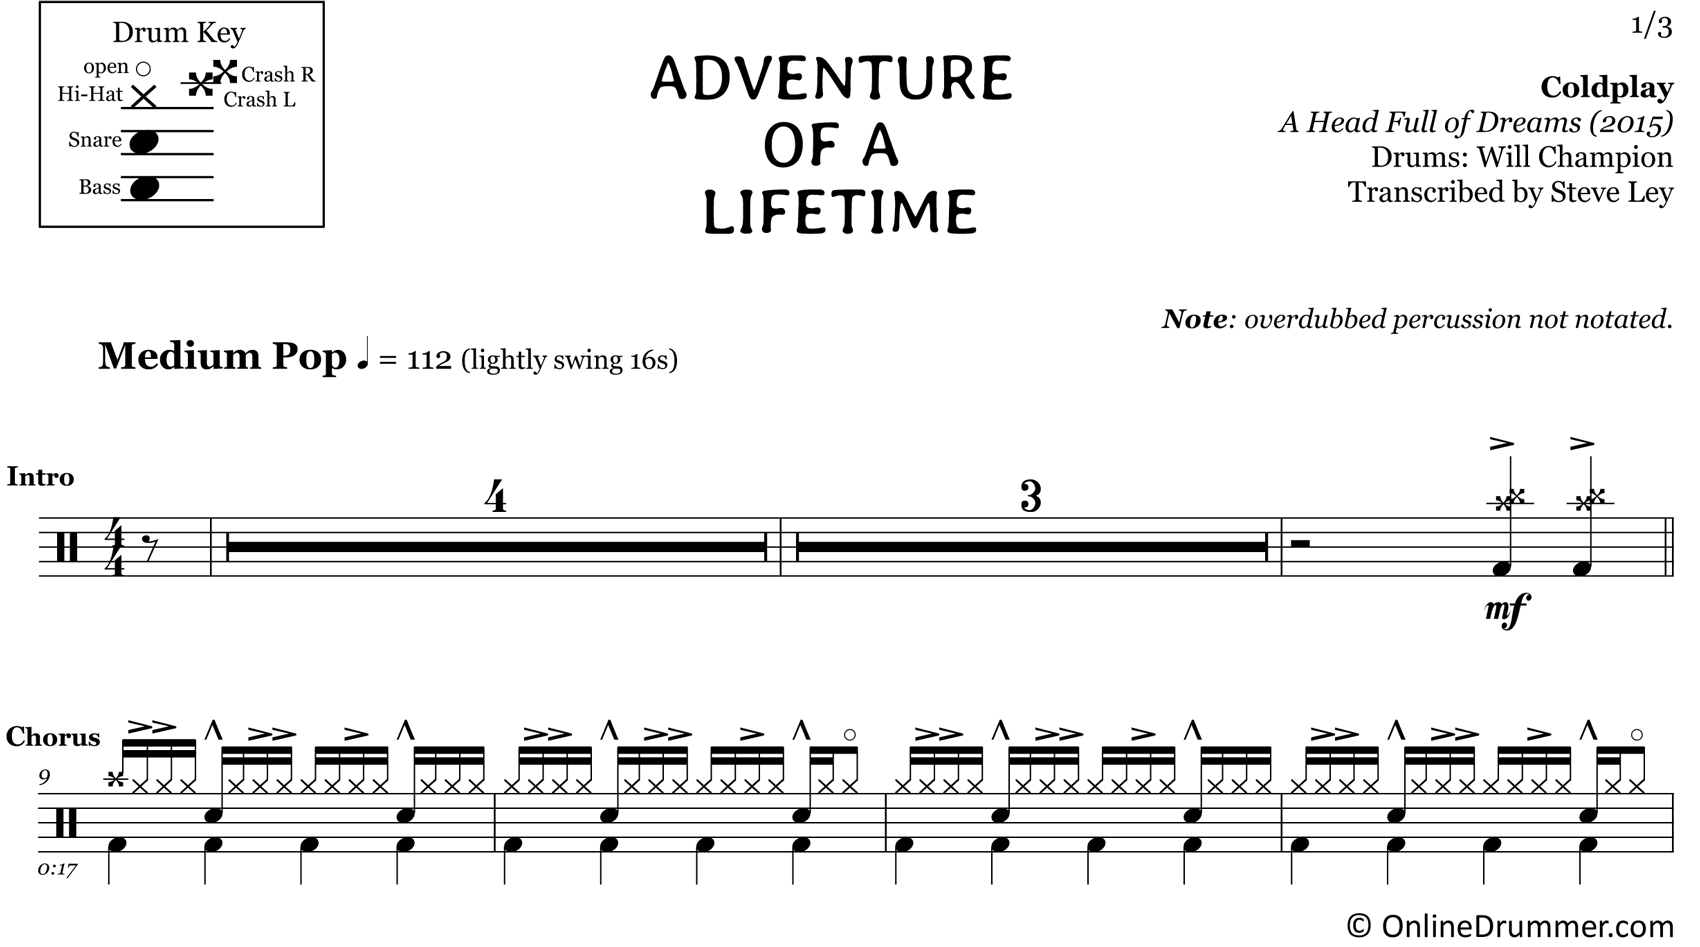 Adventure of a Lifetime - Coldplay - Drum Sheet Music